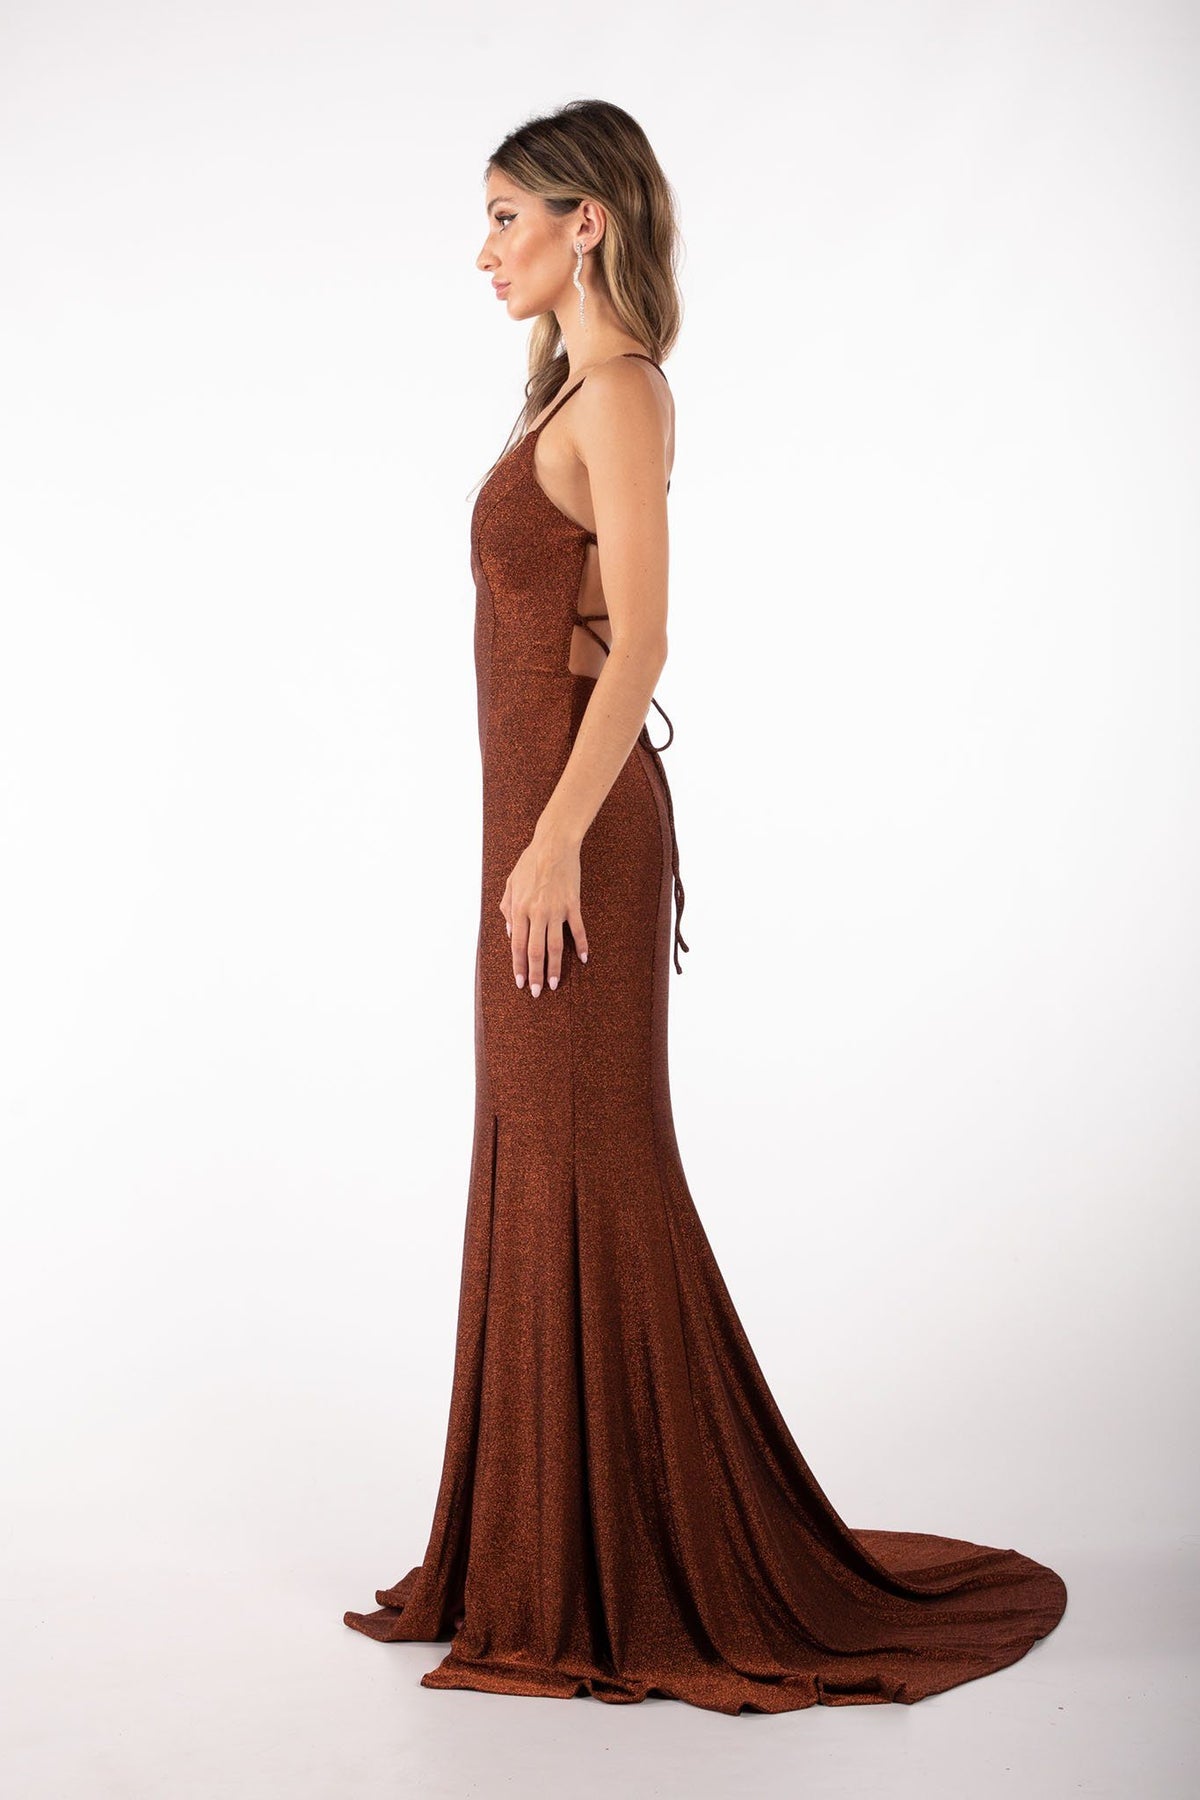 Side Image of Shimmer Copper Brown Colored Maxi Evening Gown with V Neck, Side Split and Lace Up Open Back